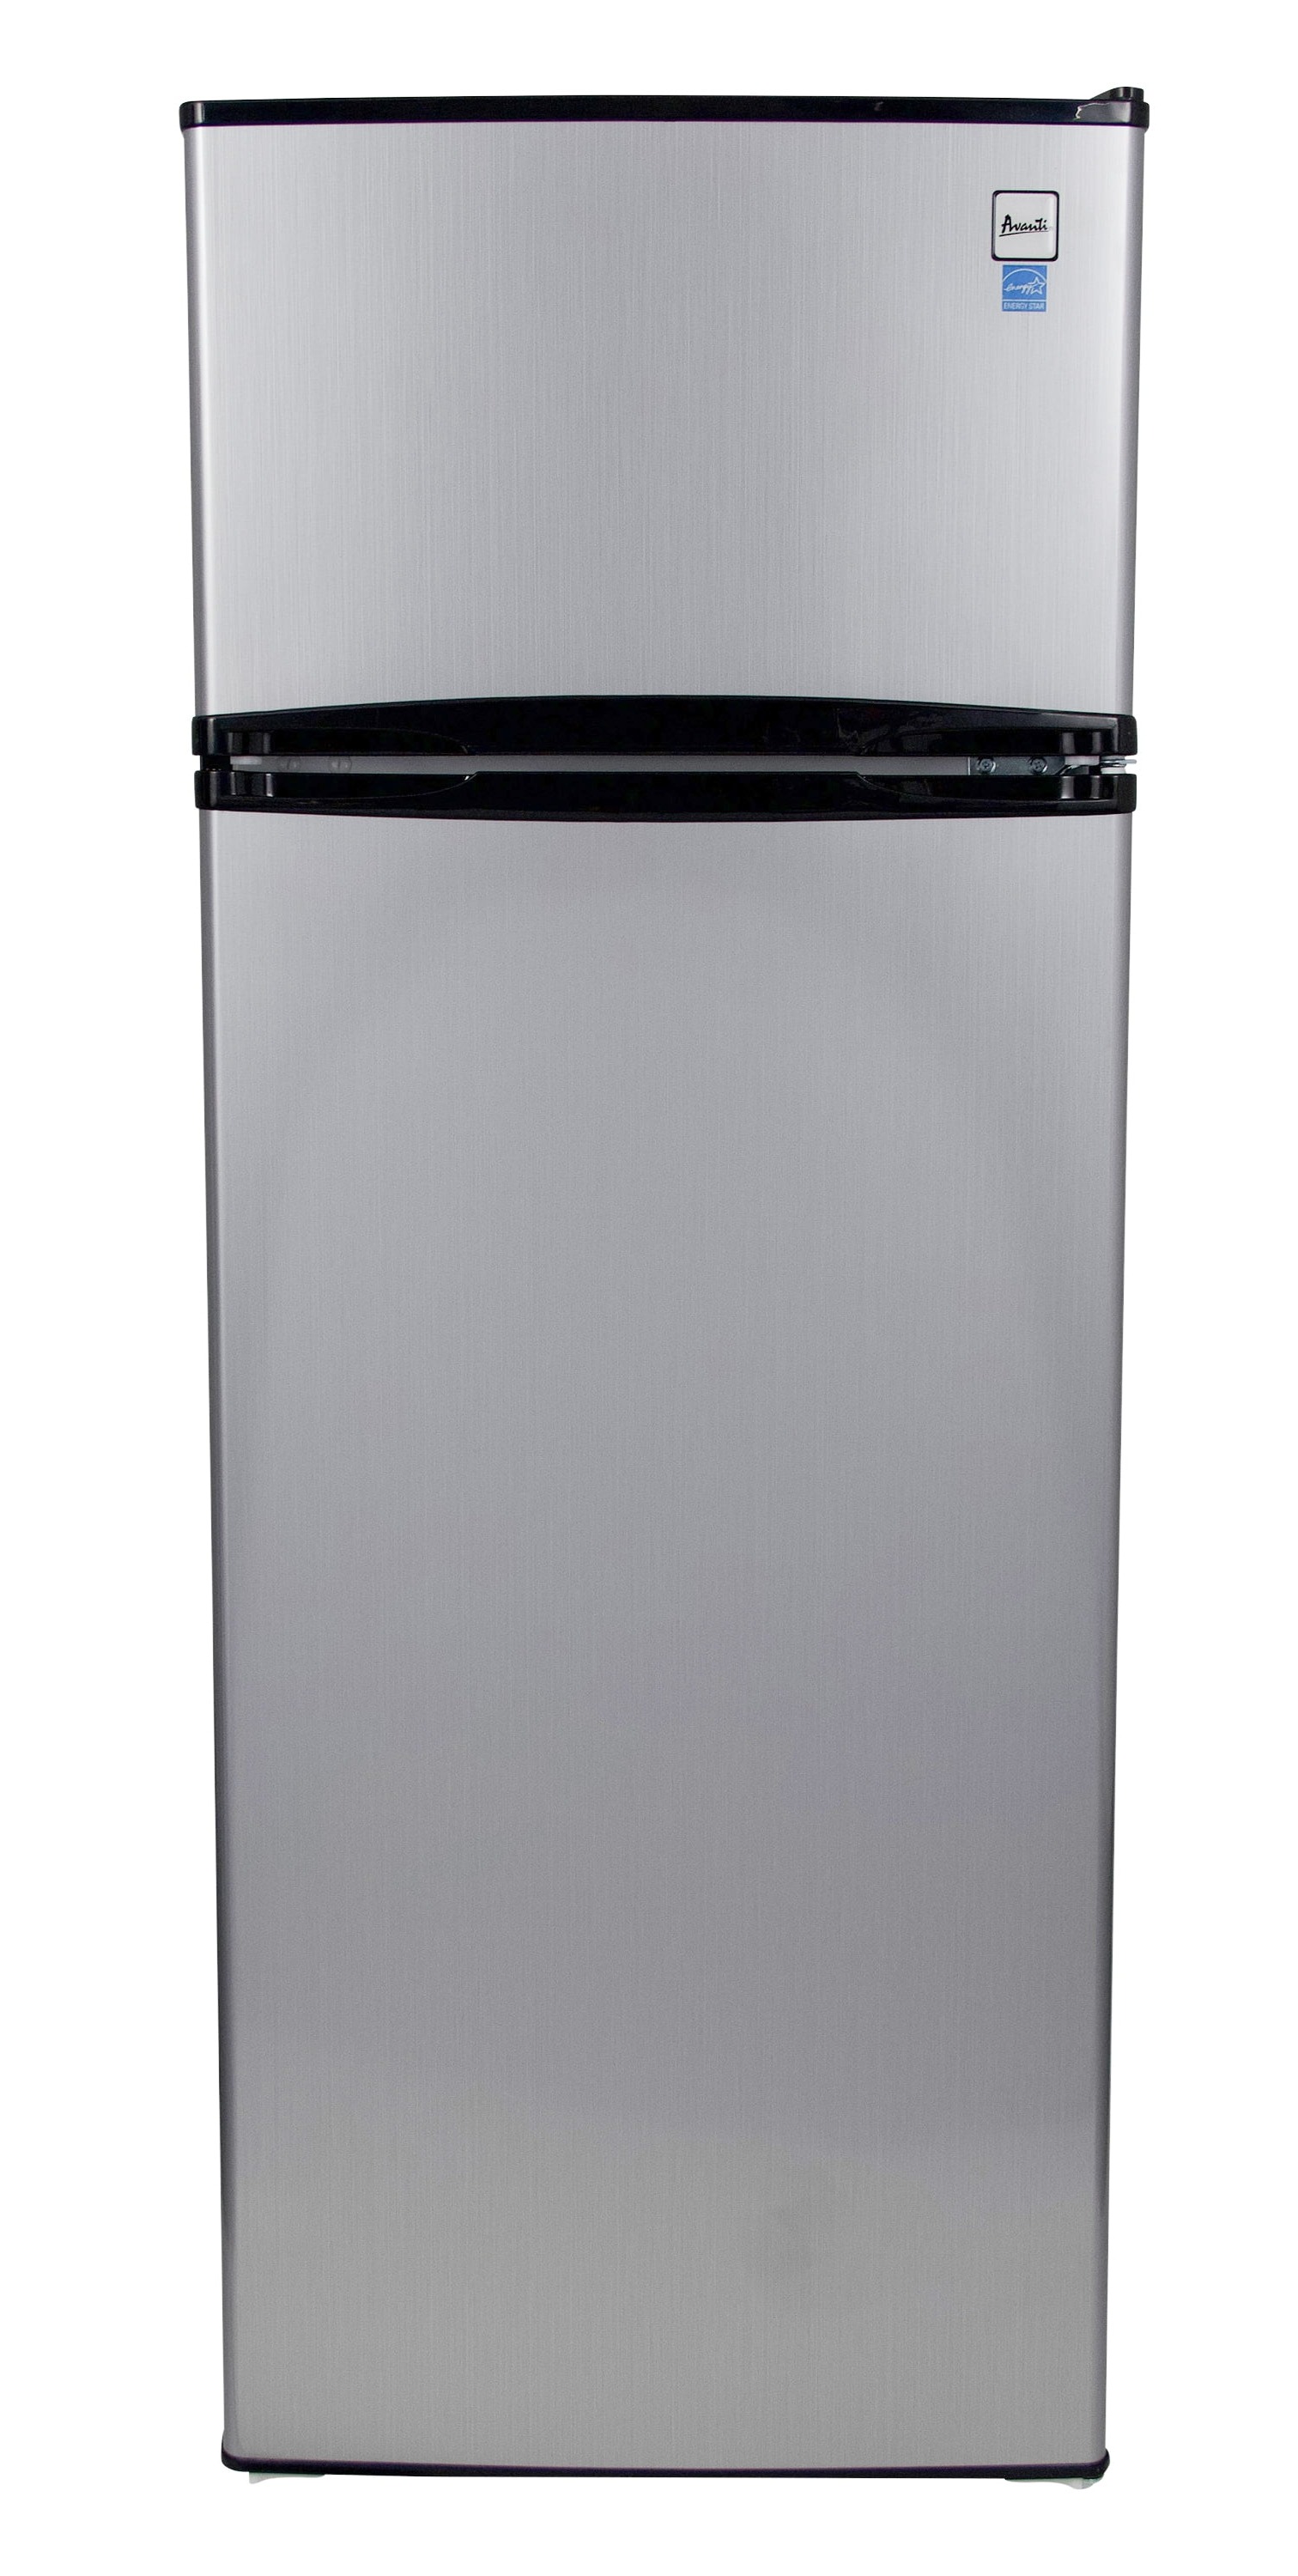 7.3 Cu Ft Avanti Apartment Refrigerator (Stainless Steel or White) $194 + Free Shipping